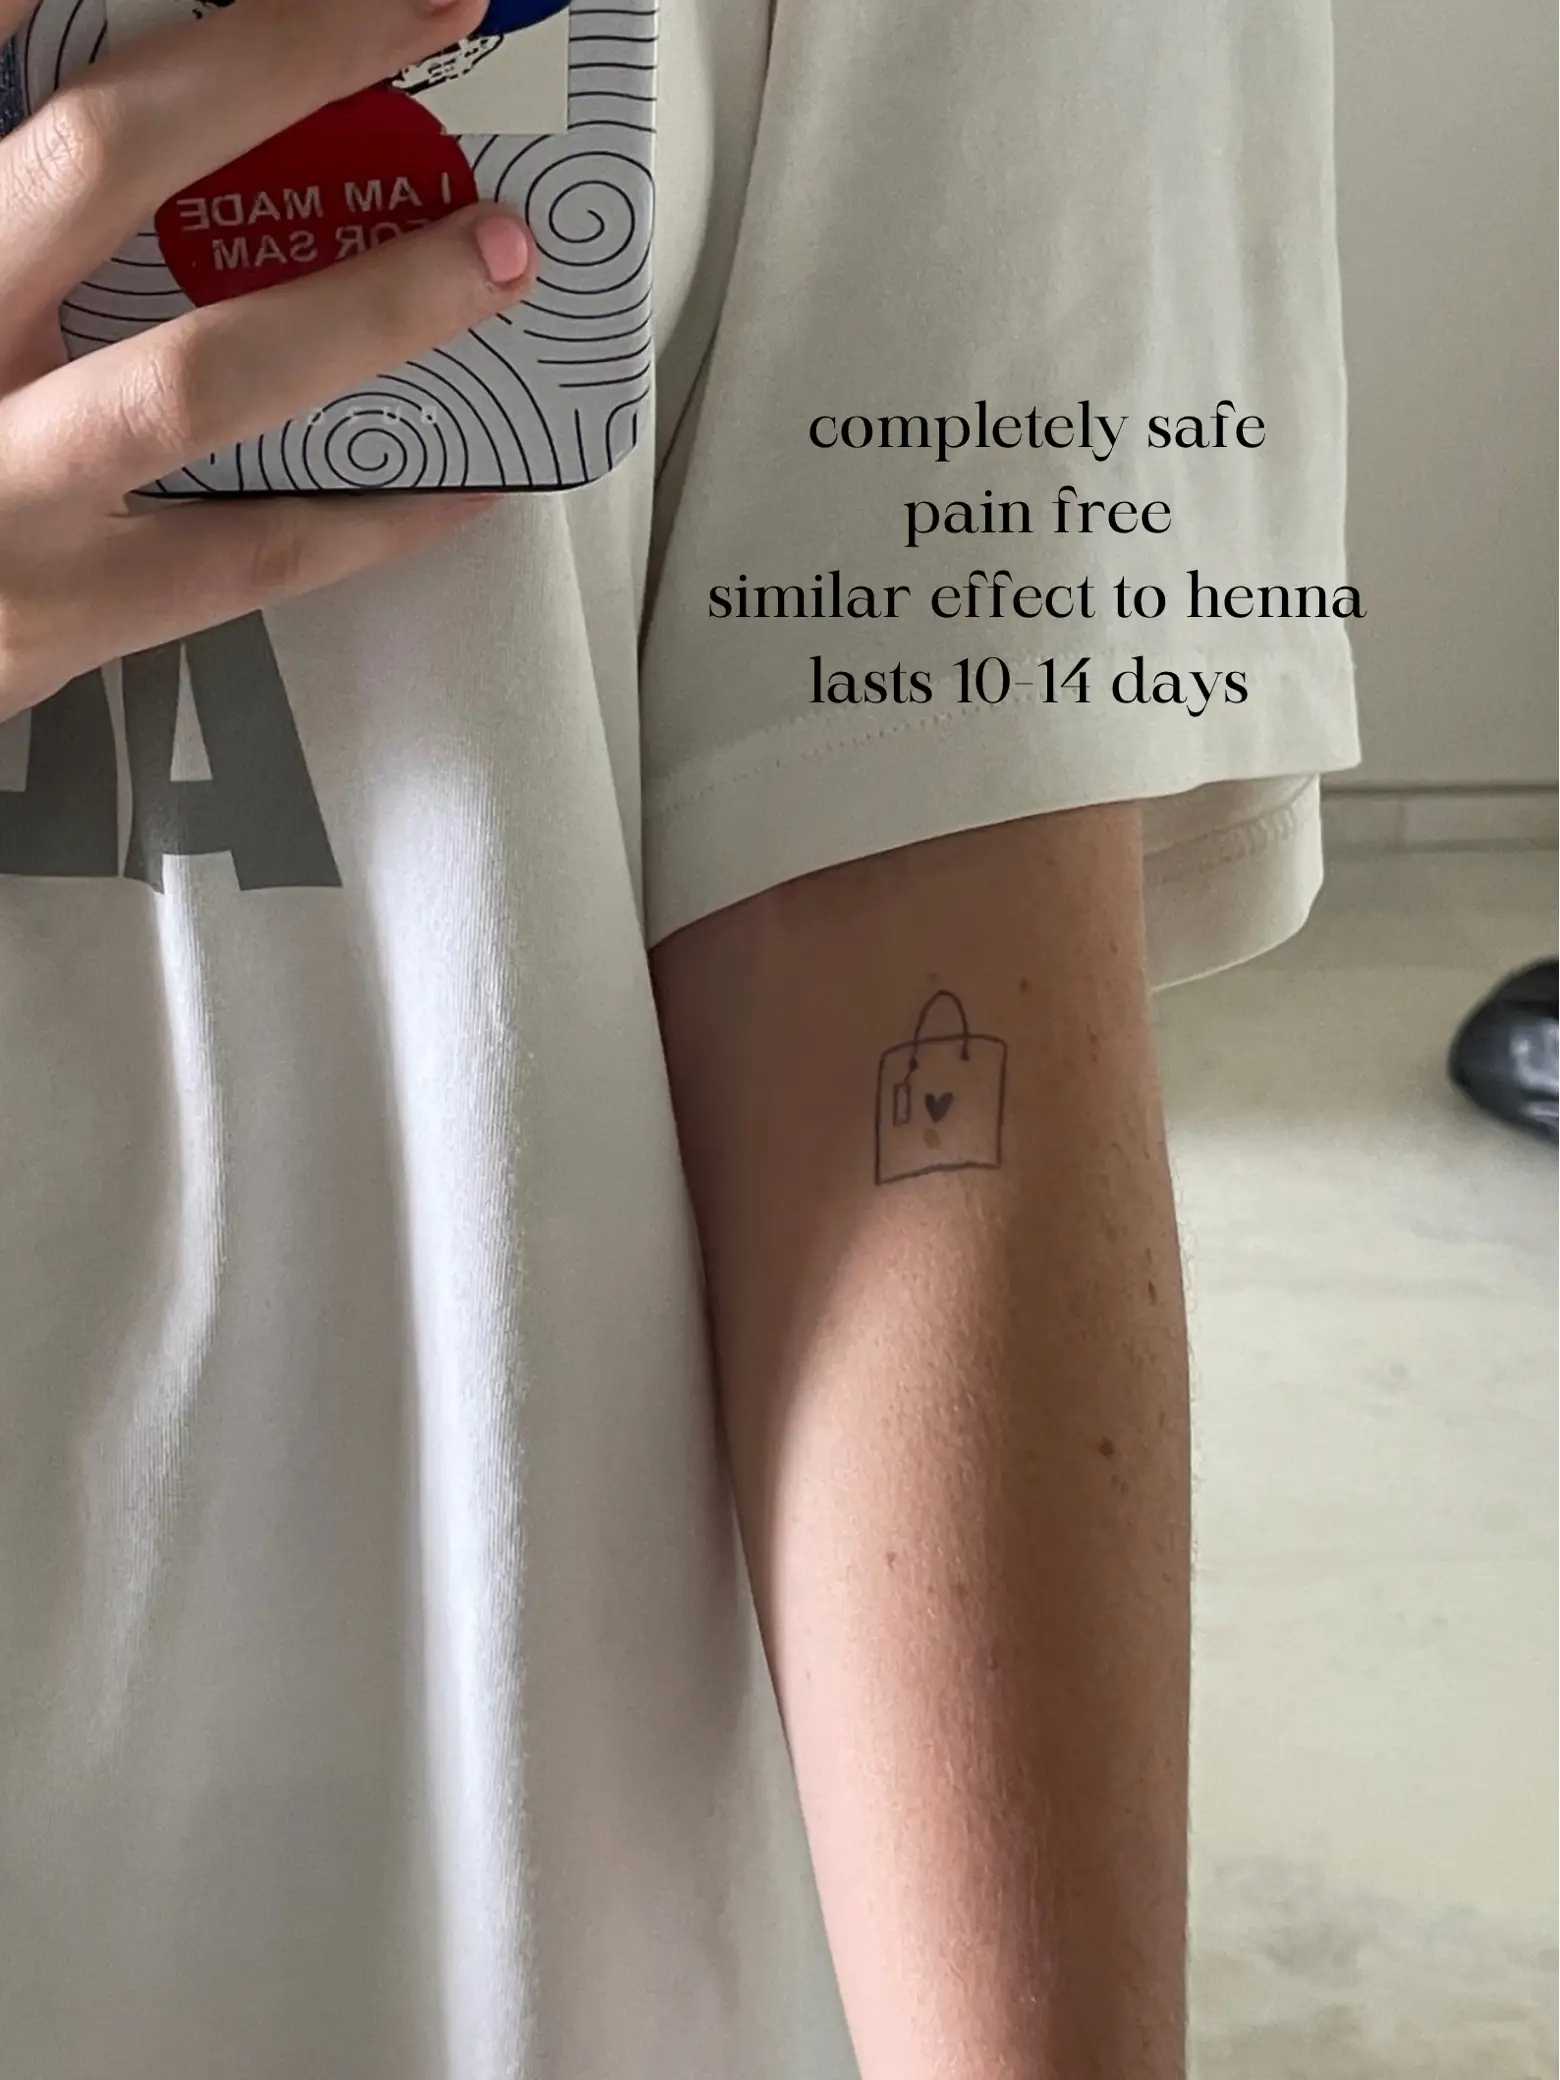 super cute tattoos i'm obsessed w atm, Gallery posted by allycardoso